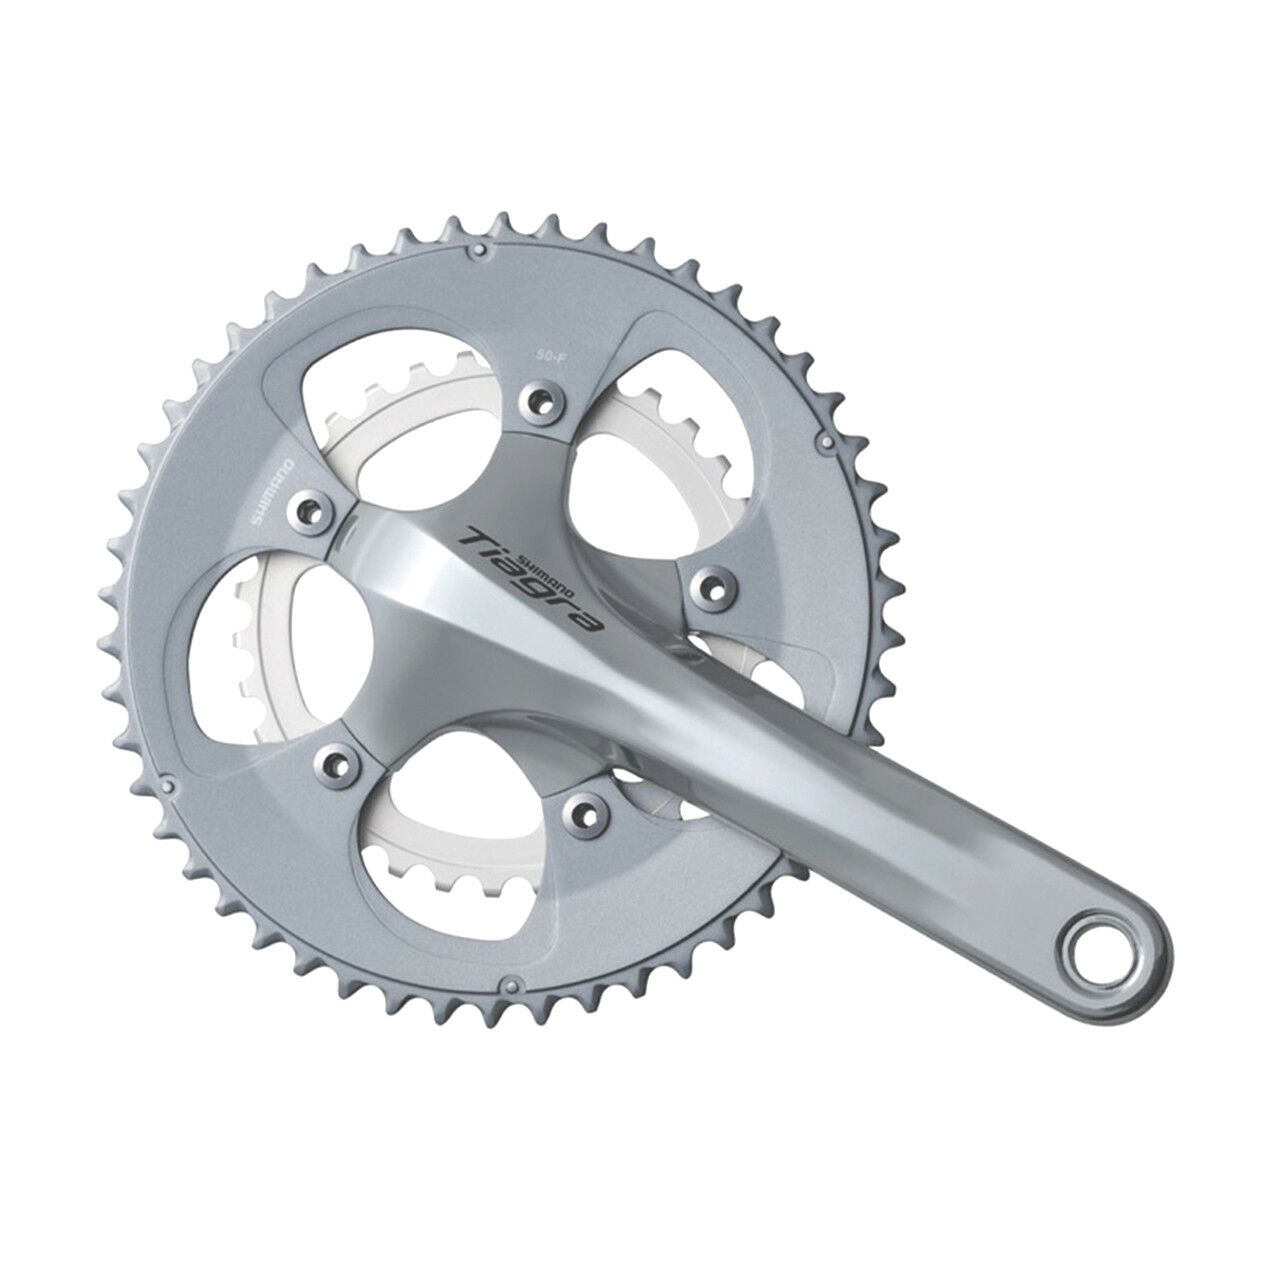 Shimano Tiagra 4650 10 Spd Double Compact Road Crankset Silver 172.5mm - 50-34t Hollowtech II - BB Not Included